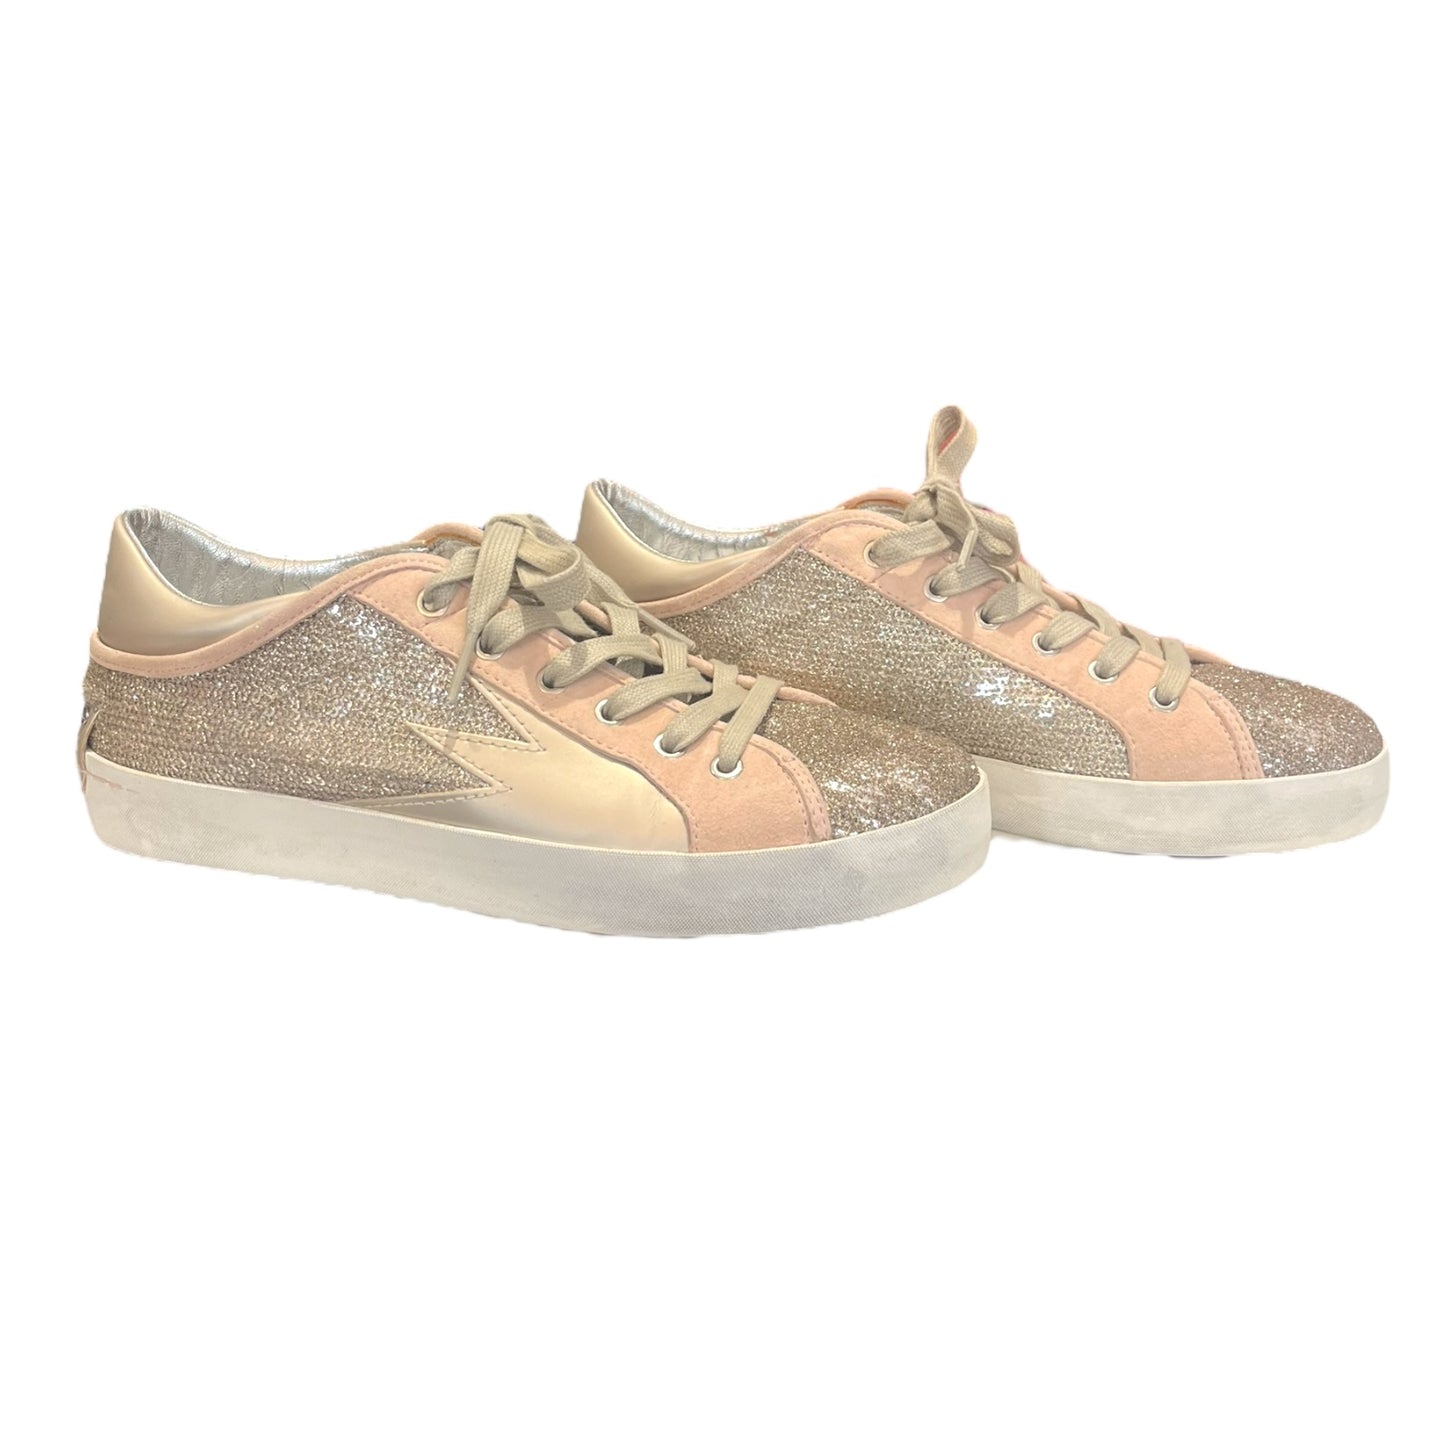 Crime London Pink Sequin Trainers - 6